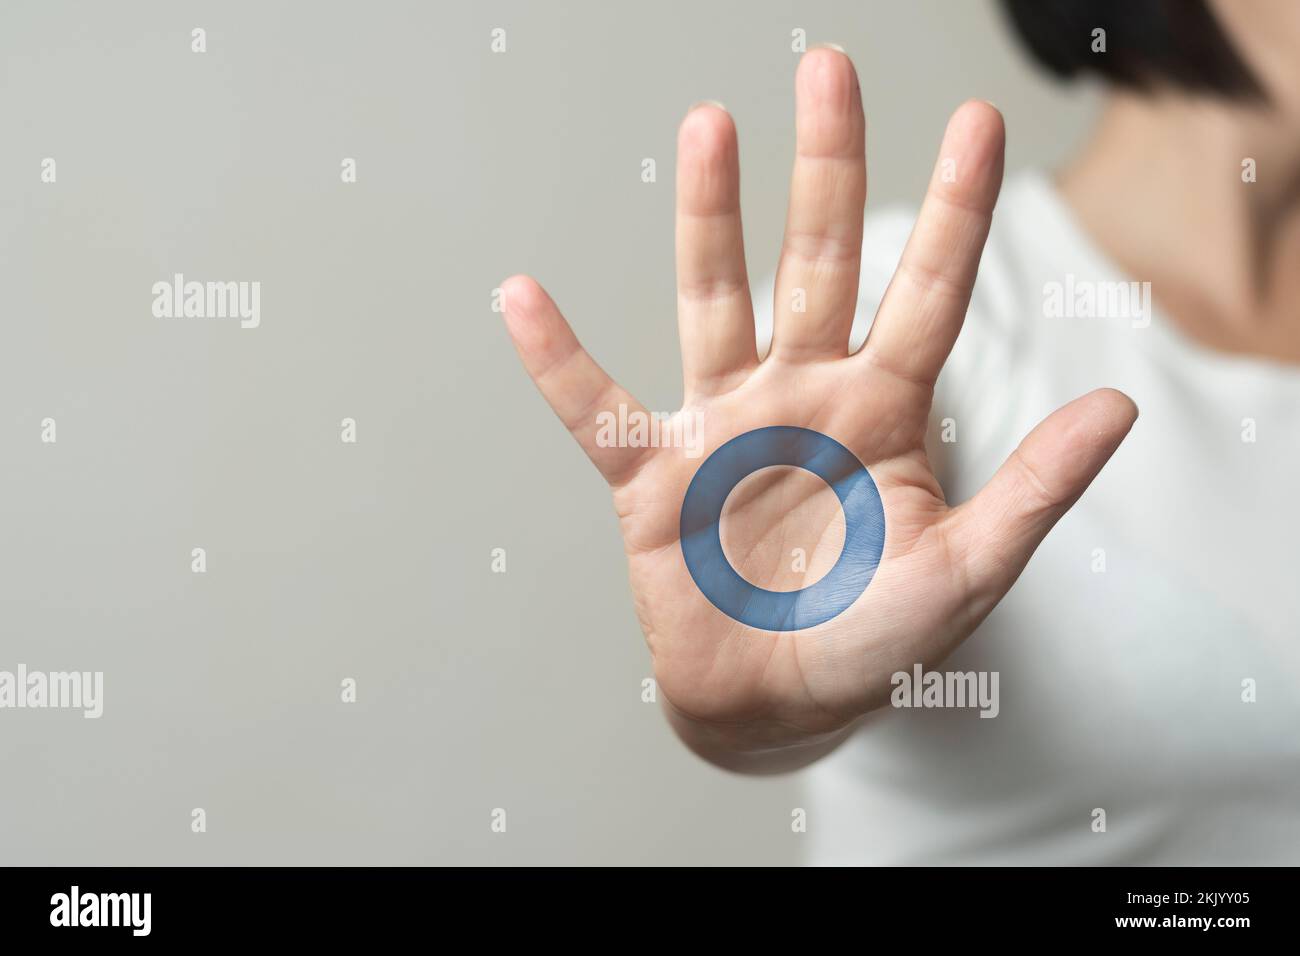 World diabetes day concept: woman shows a hand with the blue circle on it Stock Photo